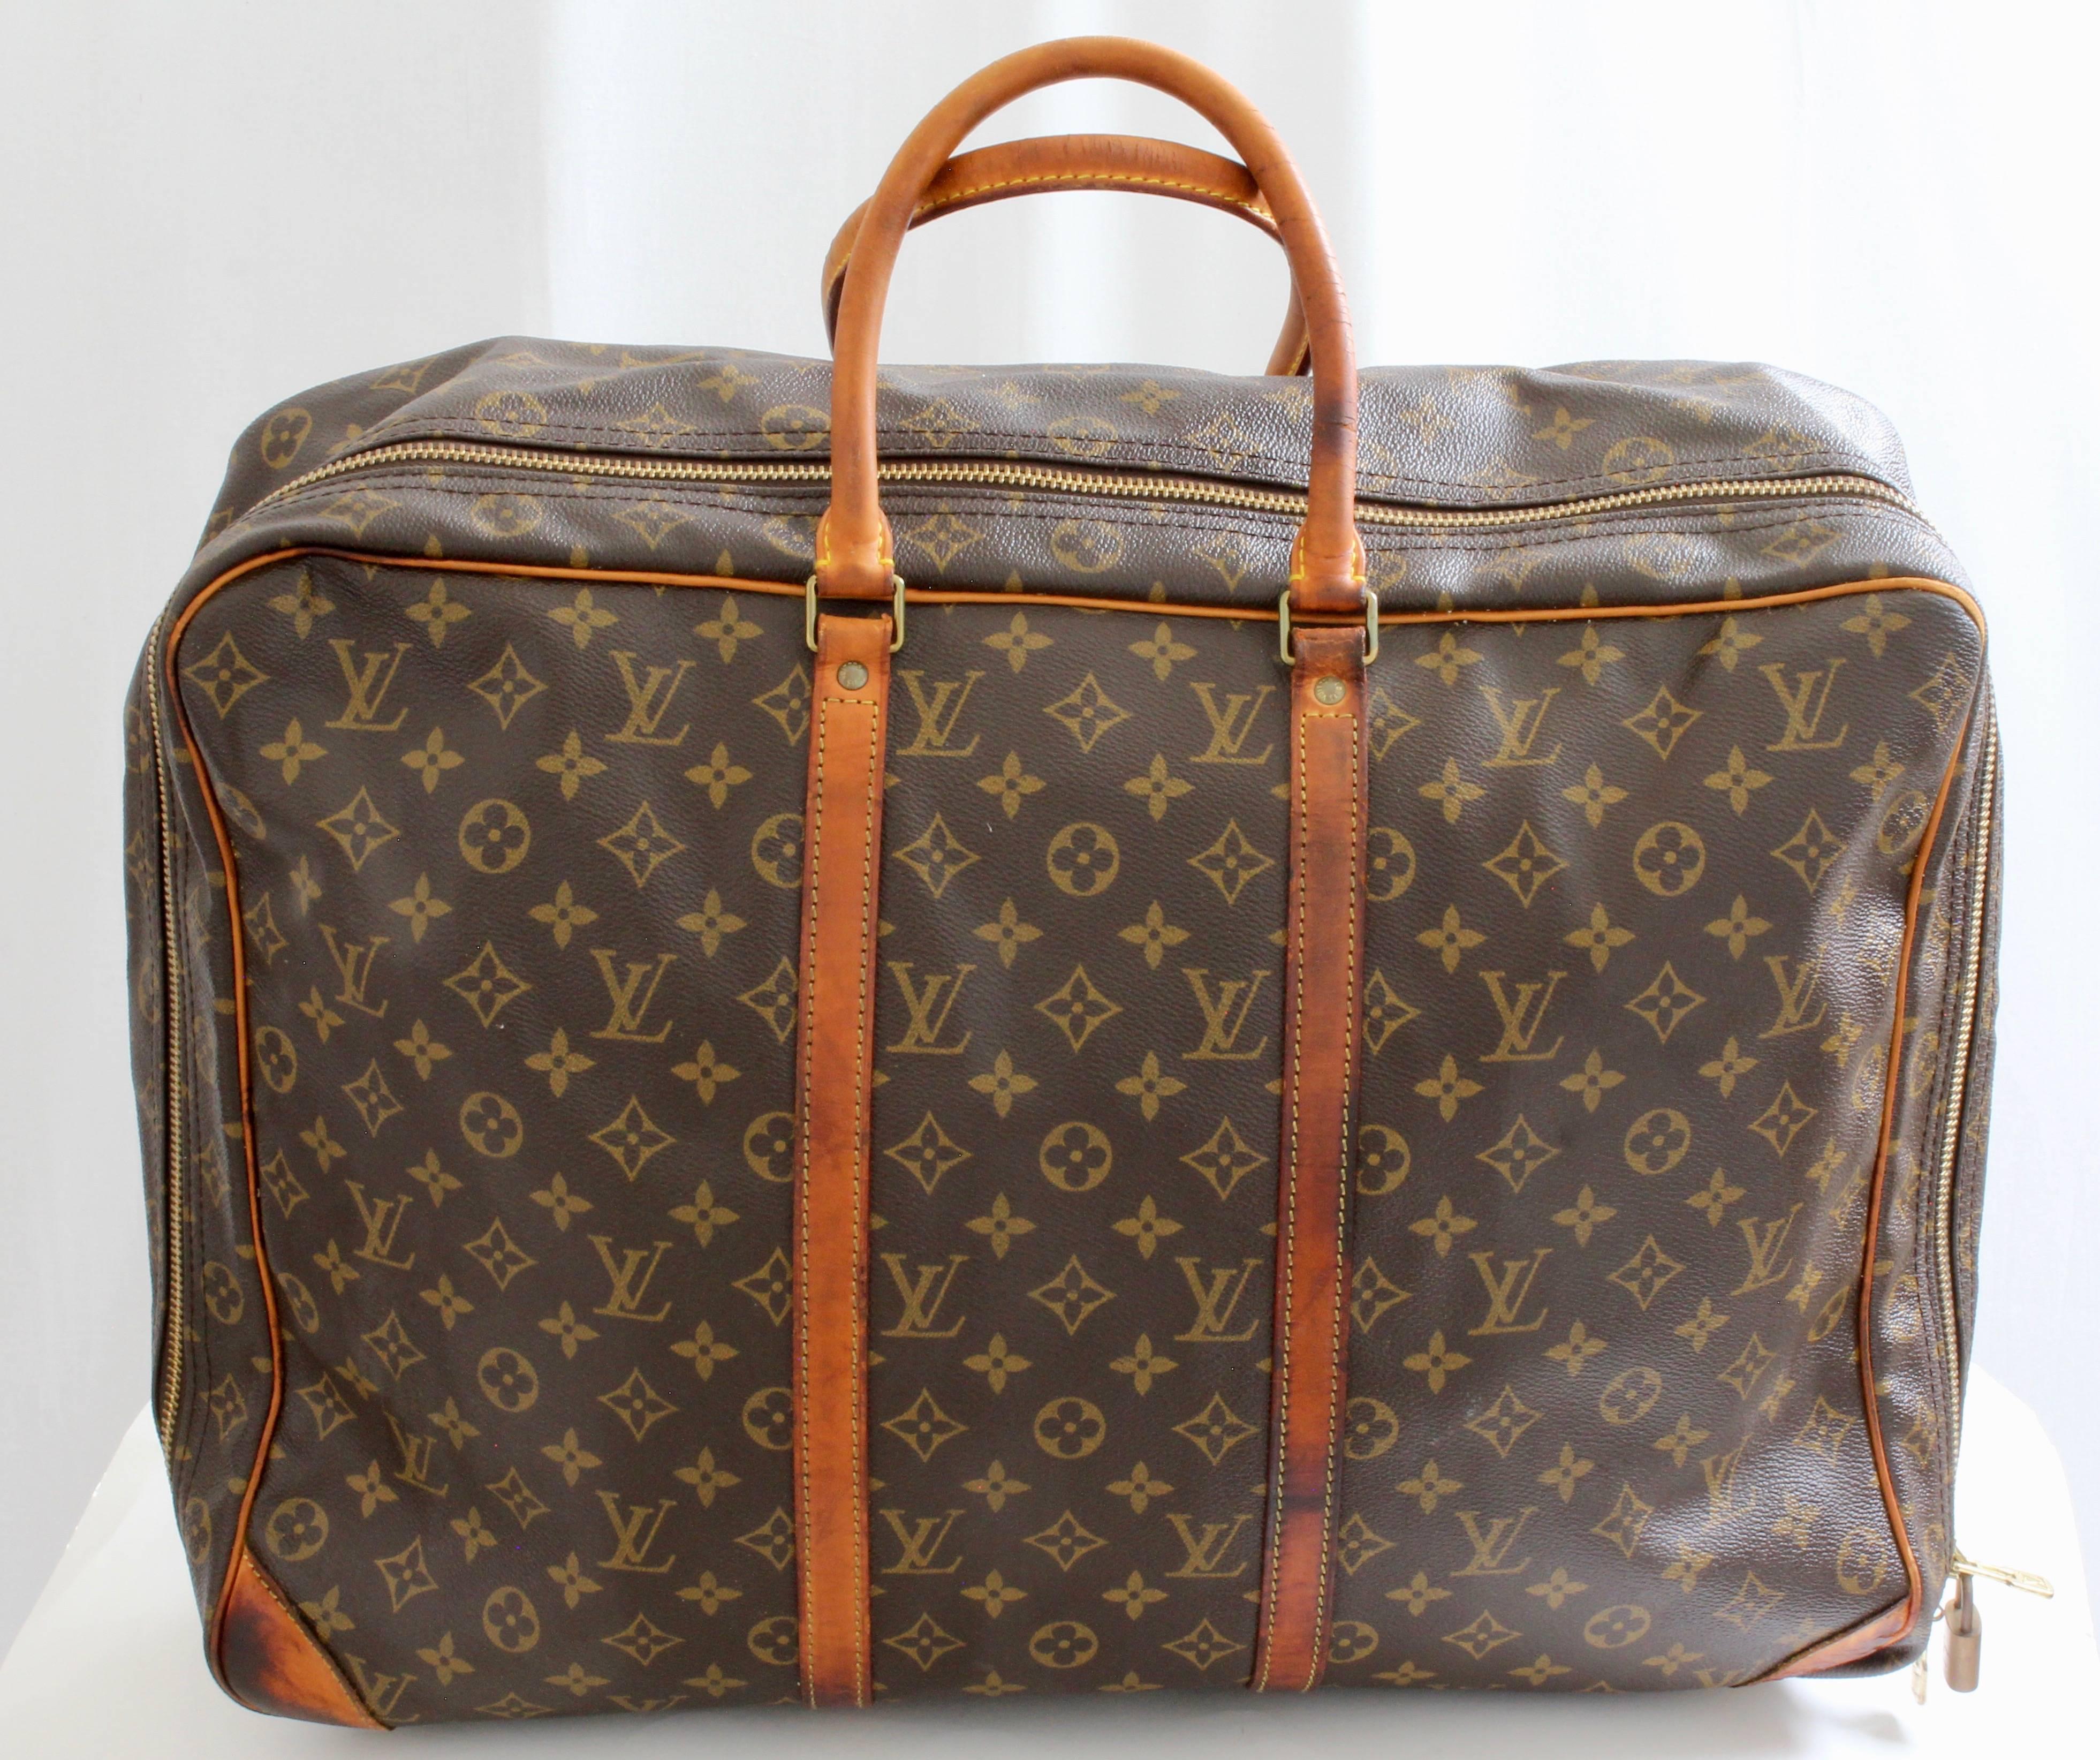 Travel in style with this vintage Louis Vuitton Monogram Sirius 50cm suitcase, made in 1989 and now discontinued in this size.  Made from their signature monogram canvas, it features rolled leather handles, a roomy interior with open pocket and